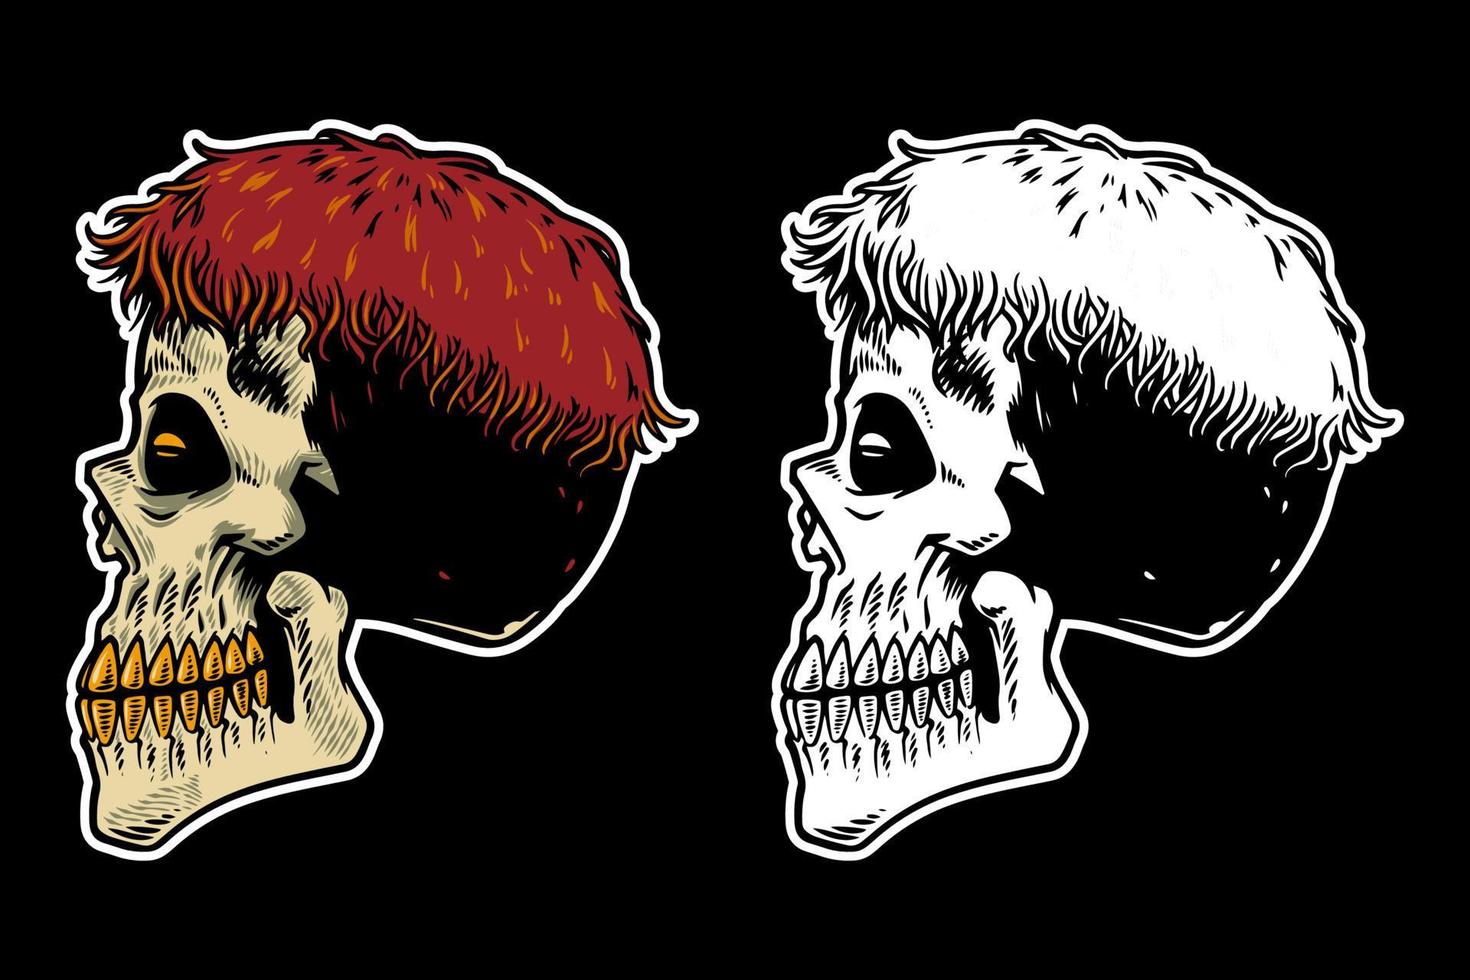 hand drawn skull head with cool hair vector illustration